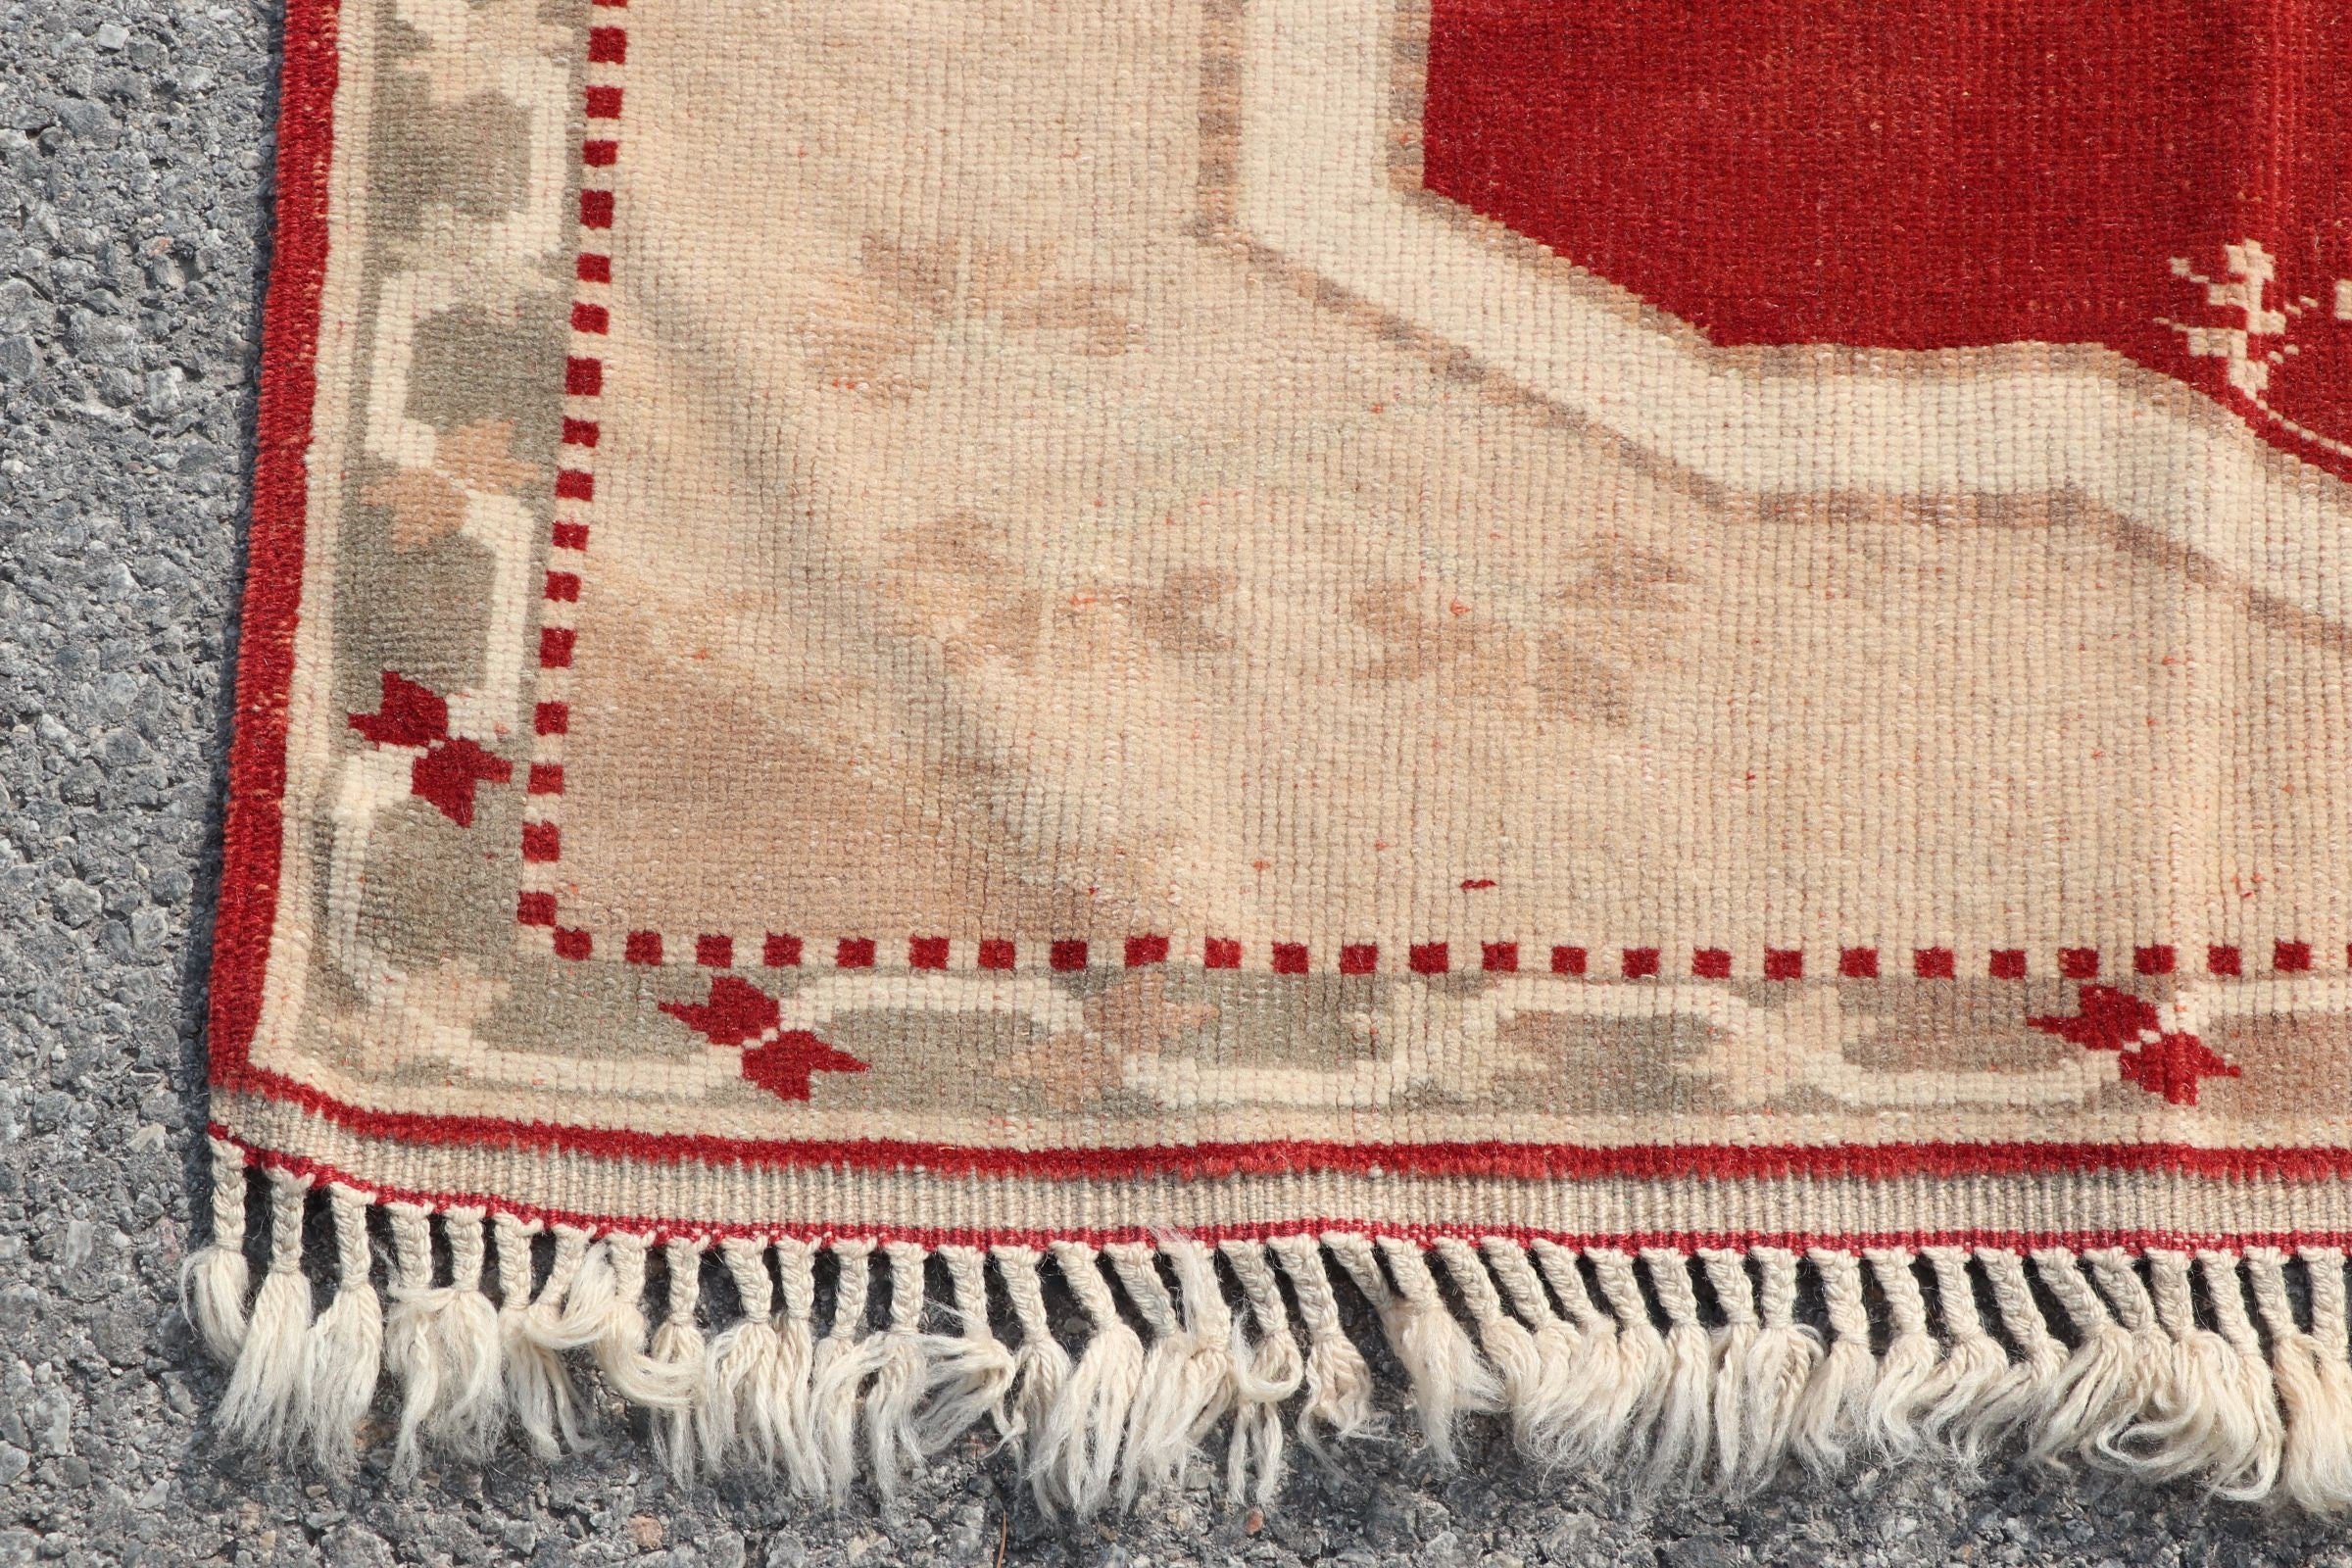 Kitchen Rug, 3.3x6 ft Accent Rugs, Antique Rug, Rugs for Kitchen, Turkish Rugs, Bedroom Rug, Vintage Rug, Red Home Decor Rug, Retro Rugs